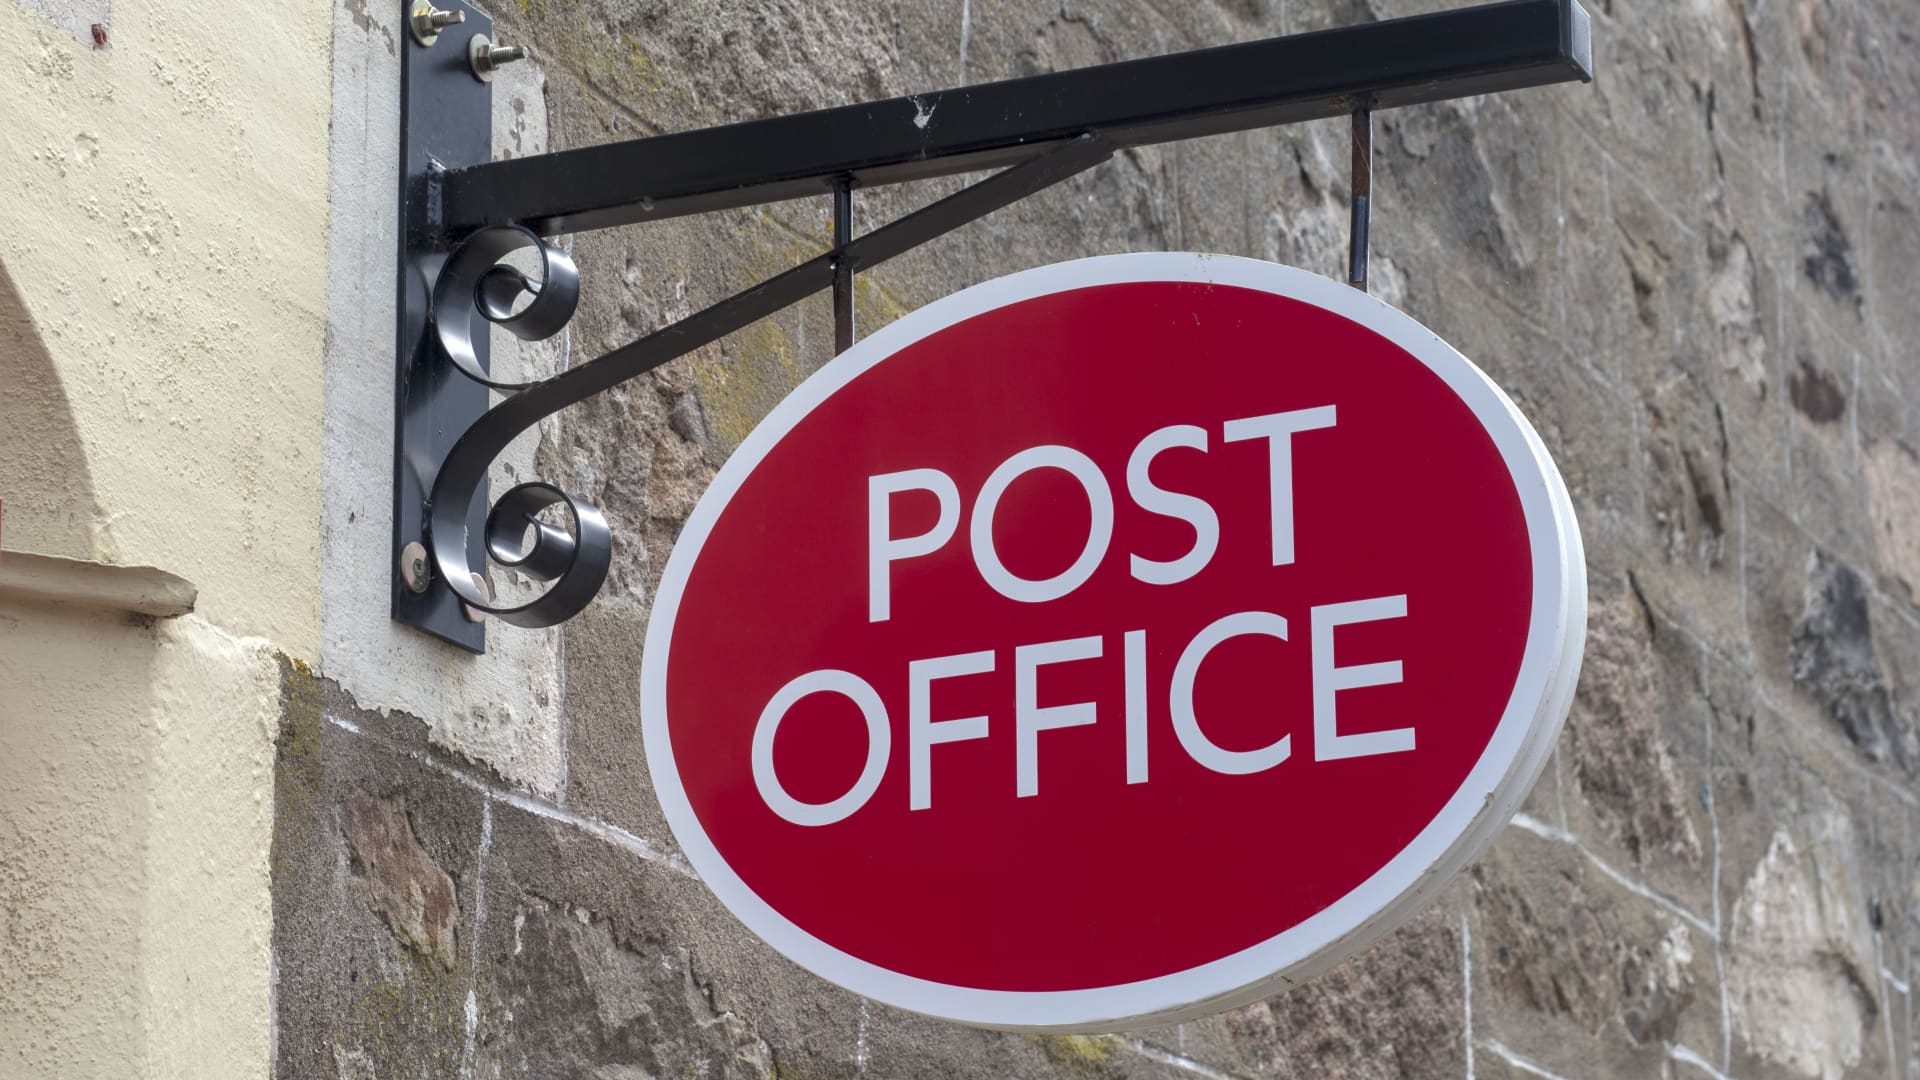 Post Office has attributed the record amount for personal cash withdrawals at its 11,500 branches to more staycations in the U.K. and people using cash to manage their budgets.